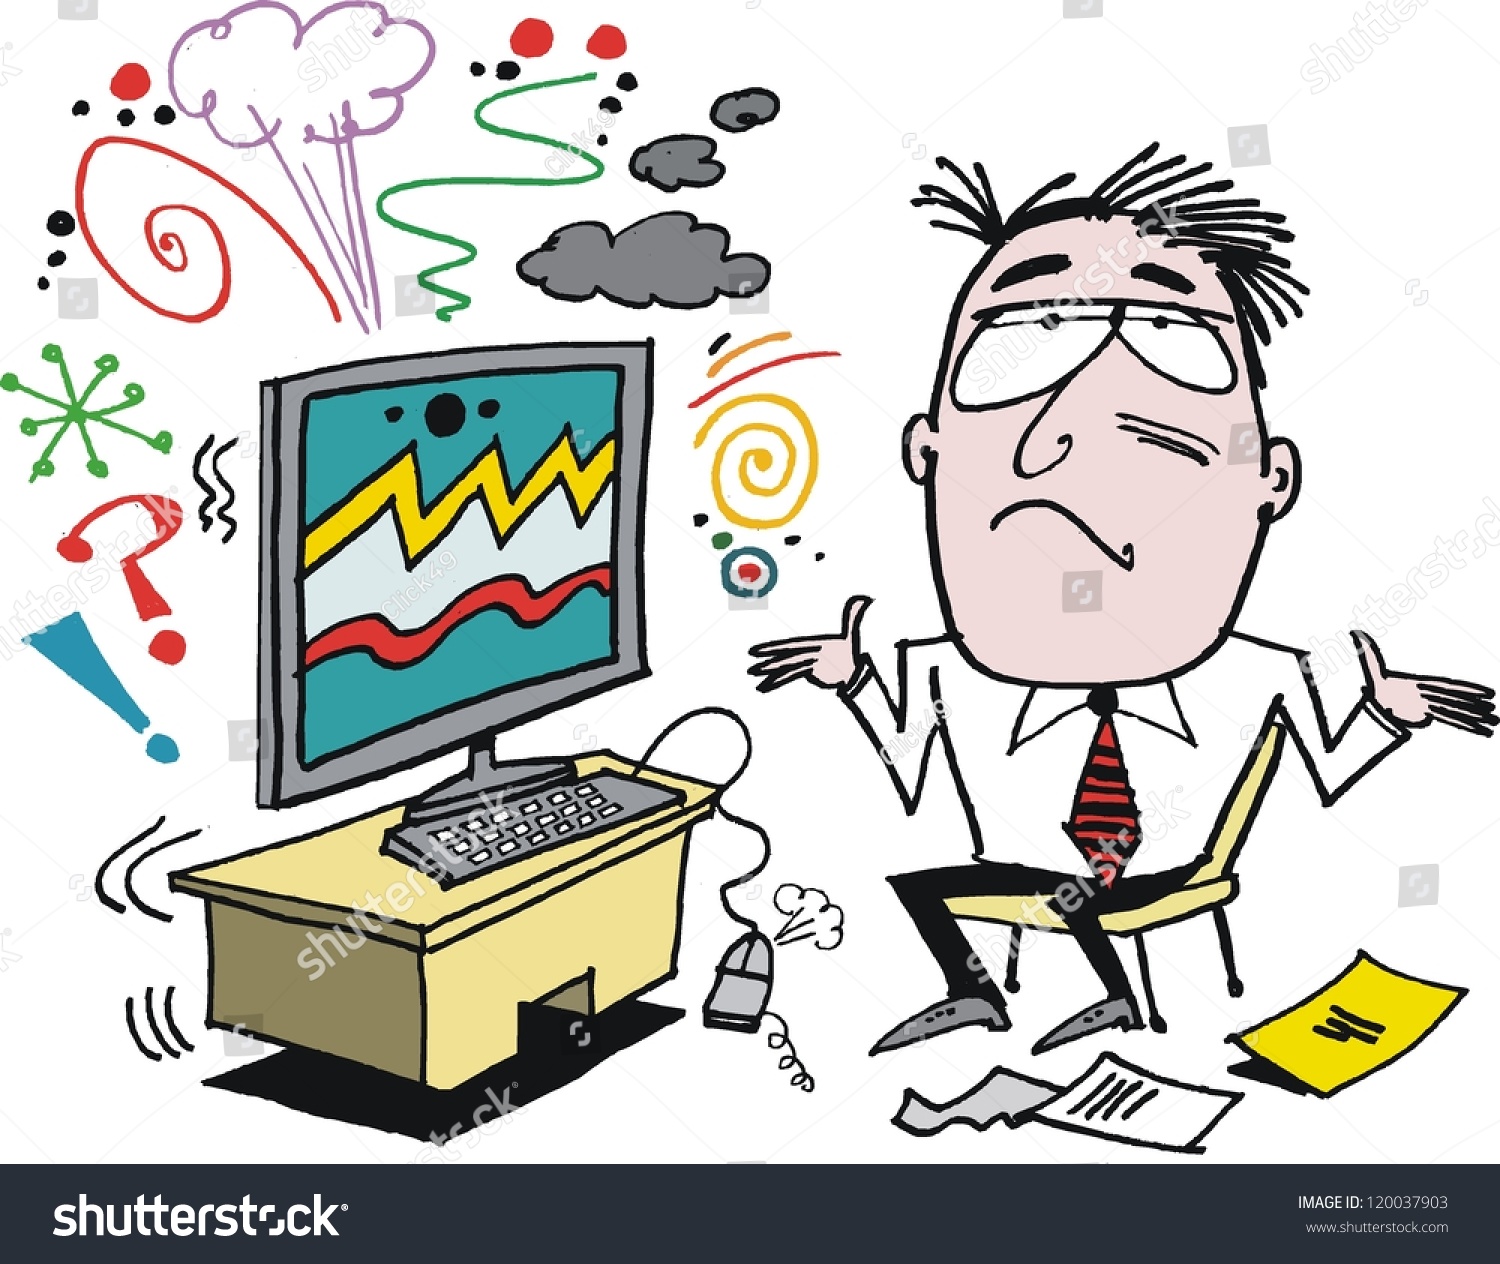 frustrated employee clipart - photo #8